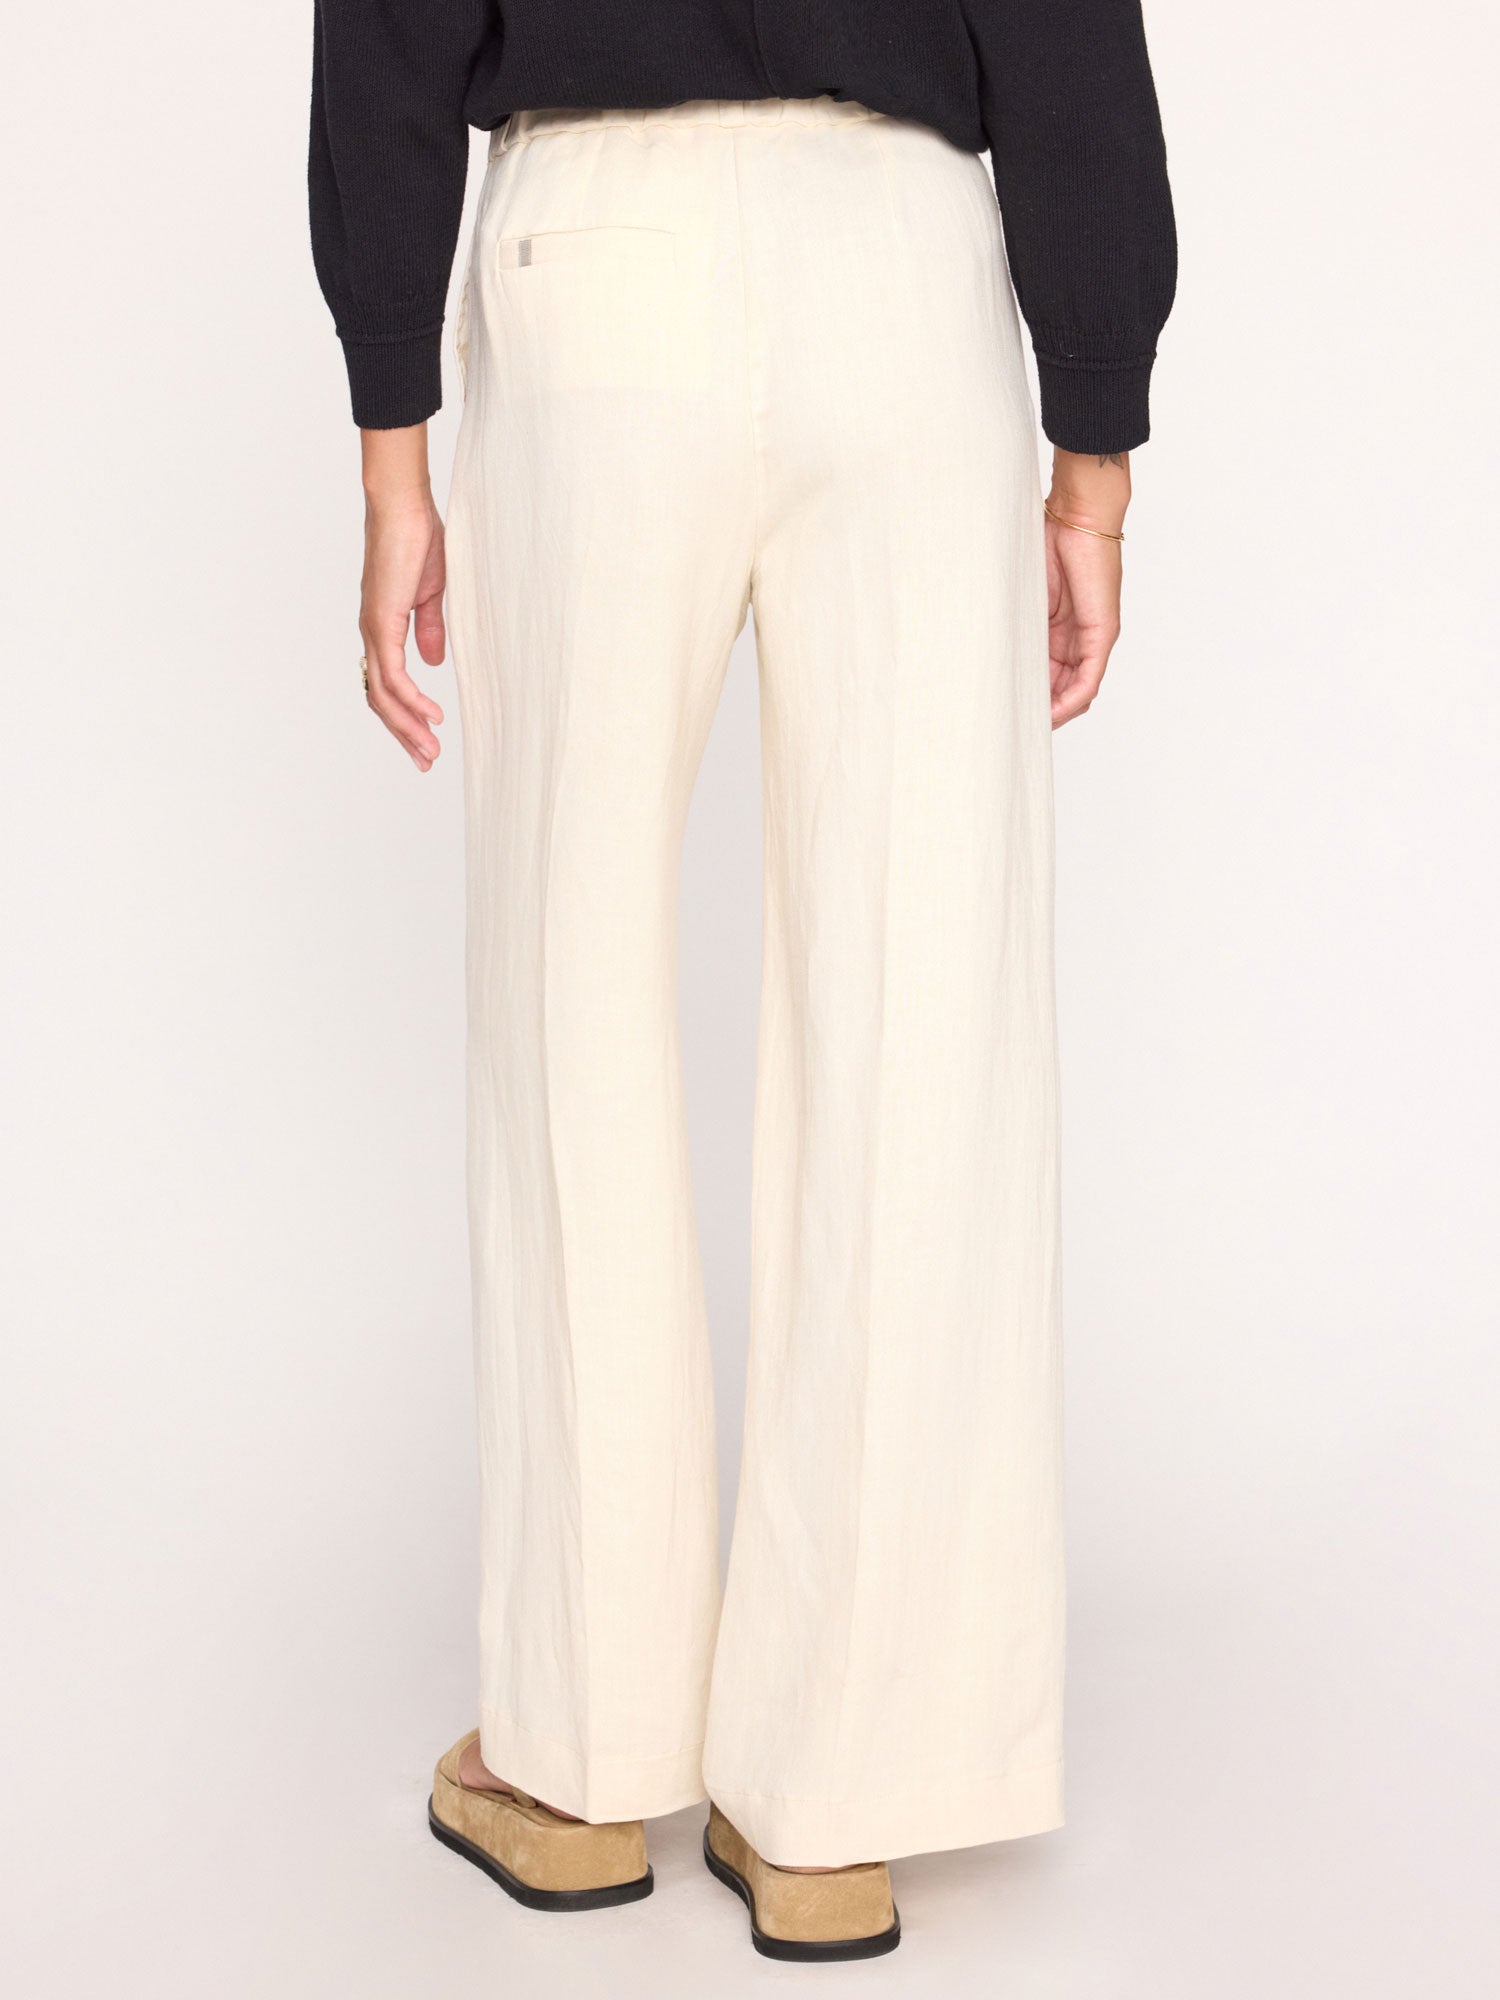 Areo linen blend wide leg beige pant back view 